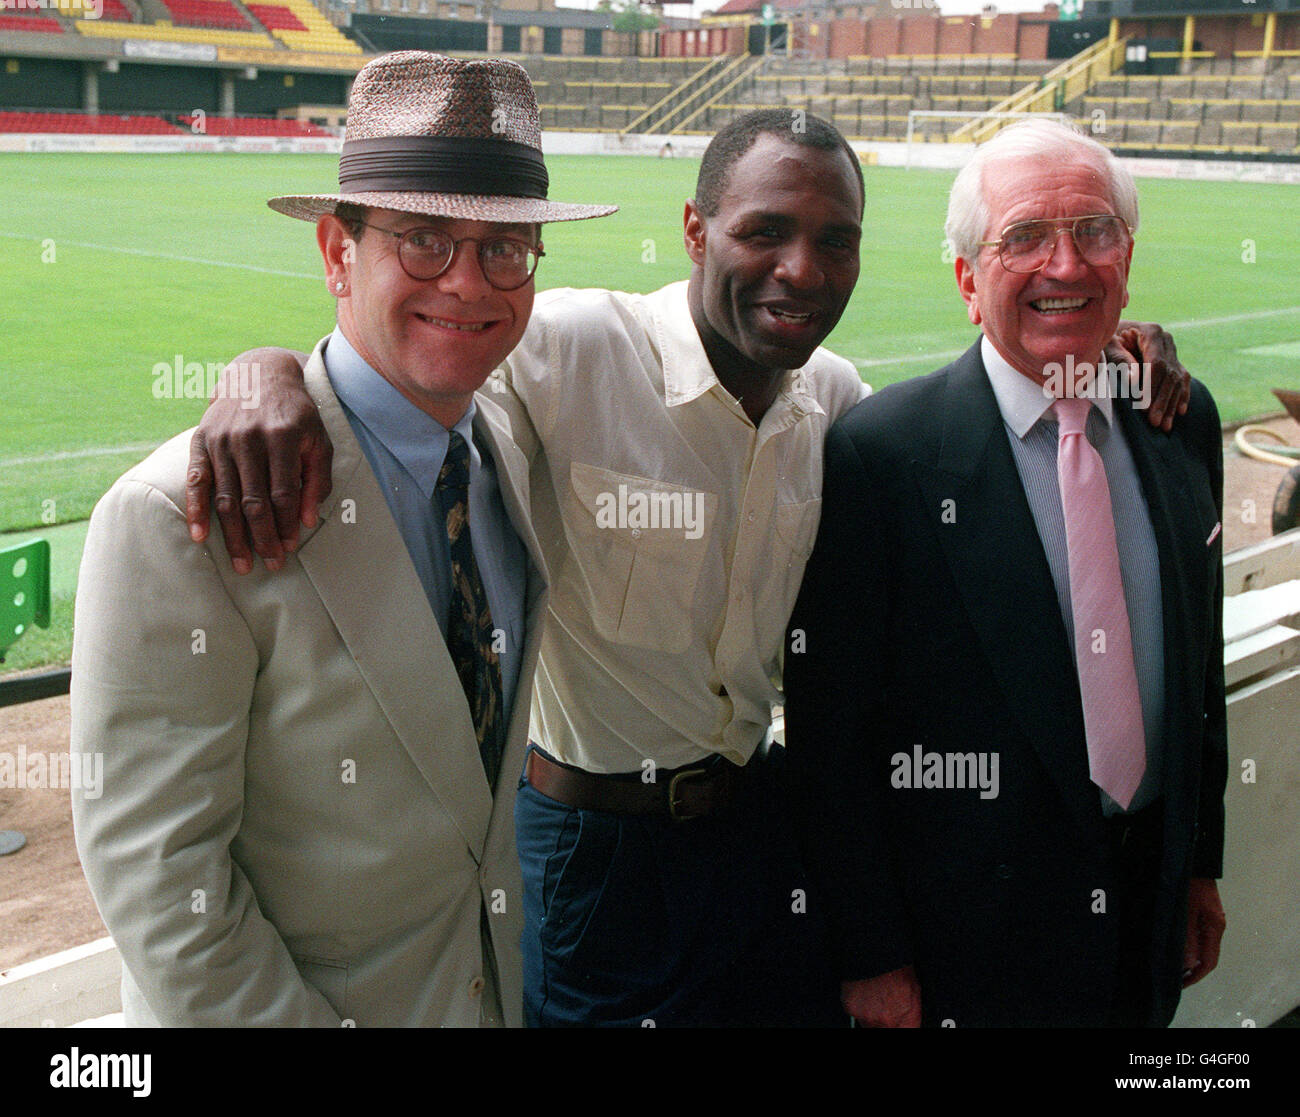 PA NEWS PHOTO 5/8/91  ELTON JOHN (DIRECTOR) WITH NEW SIGNING LUTHER BLISSETT AND CHAIRMAN JACK PETCHIE (RIGHT) DURING A PHOTOCALL AT WATFORD F.C. GROUND, VICARAGE ROAD Stock Photo